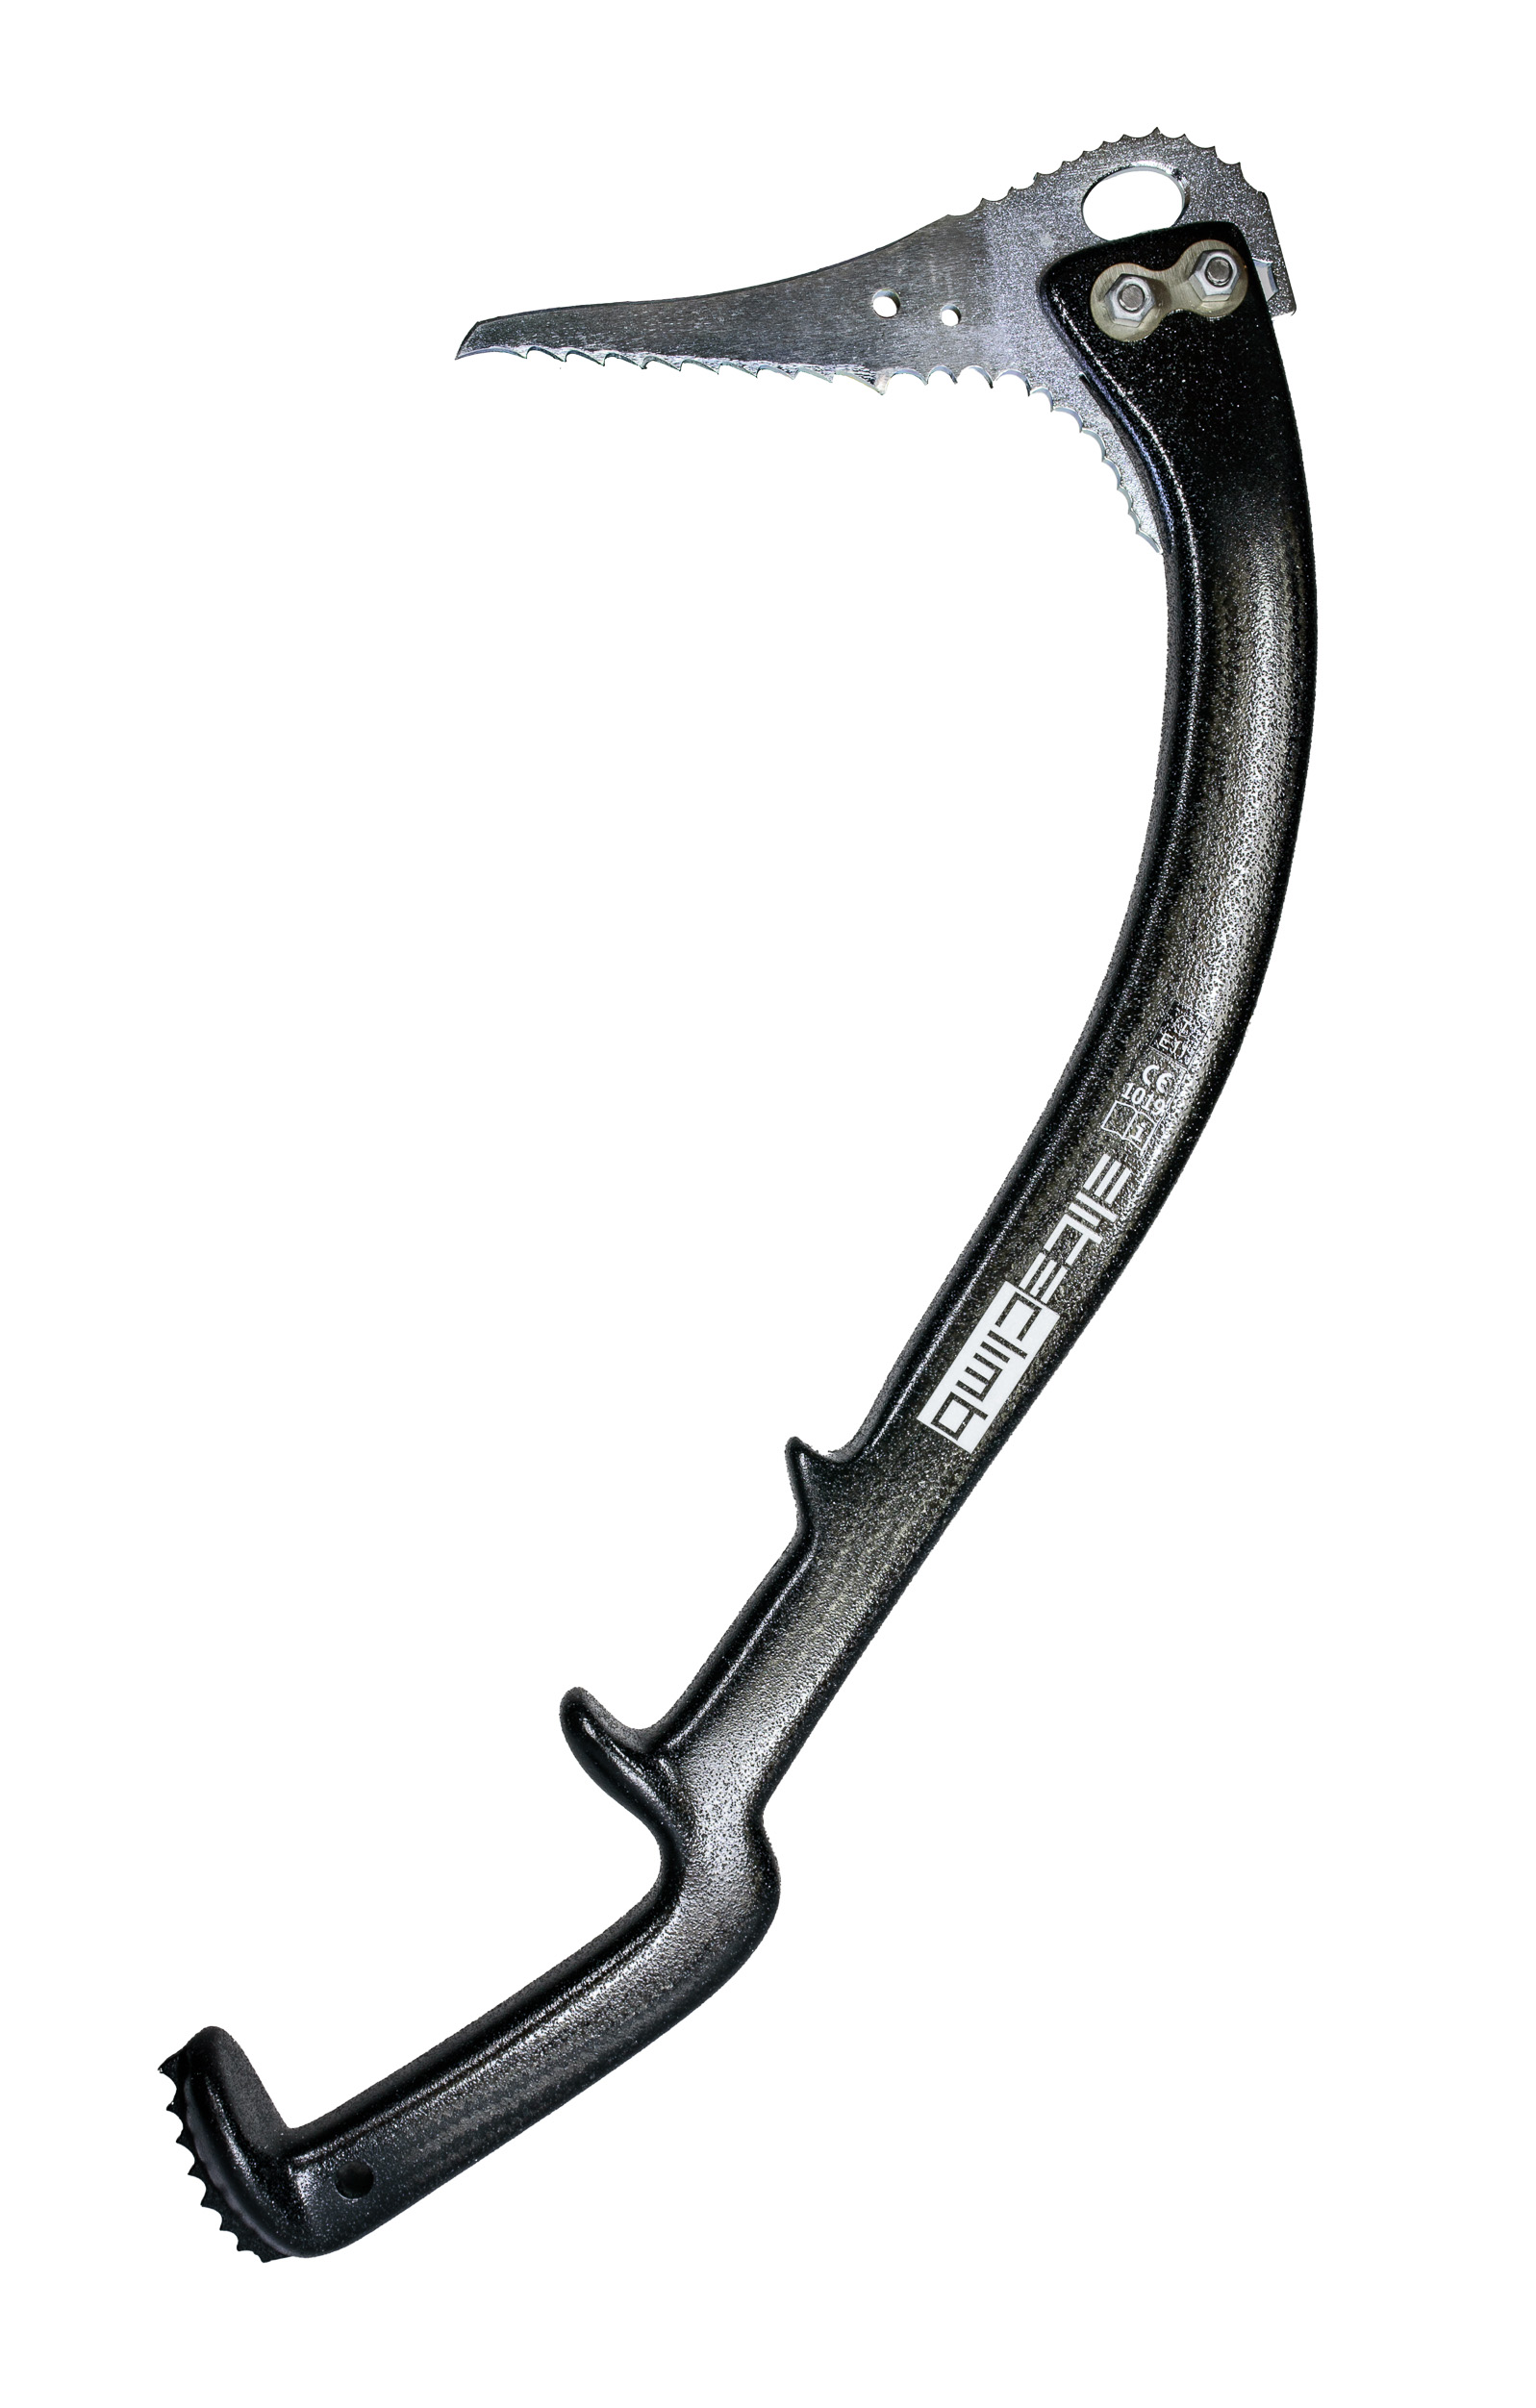 ICE, Pick for ice and mixed climbing, designed for ice axes with